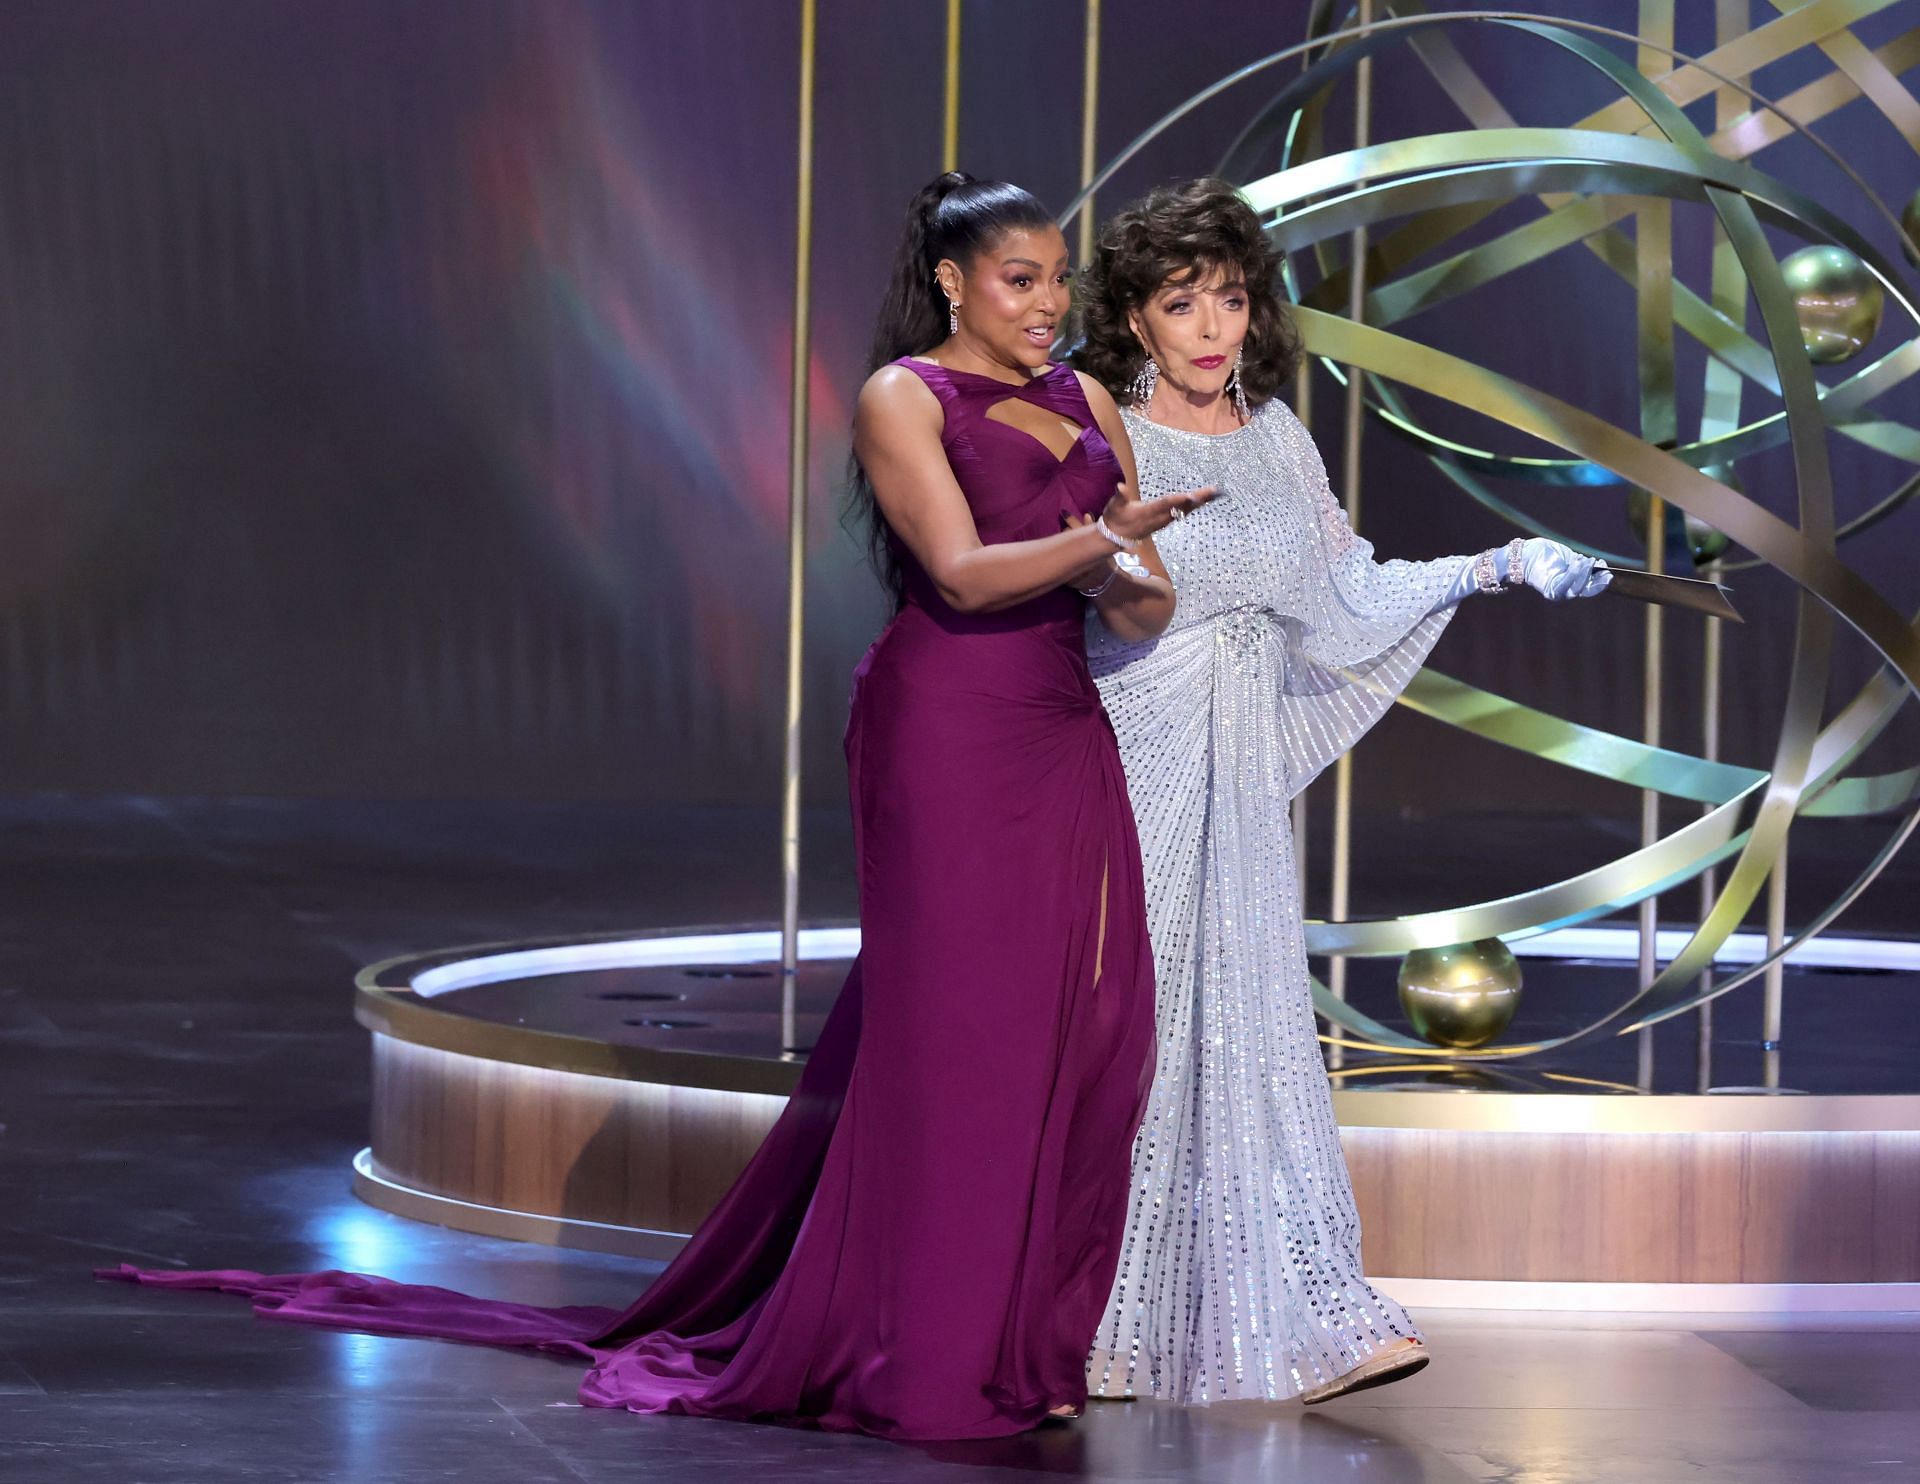 Joan Collins and Taraji P. Henson at the 75th Primetime Emmy Awards (Image via Getty Images)